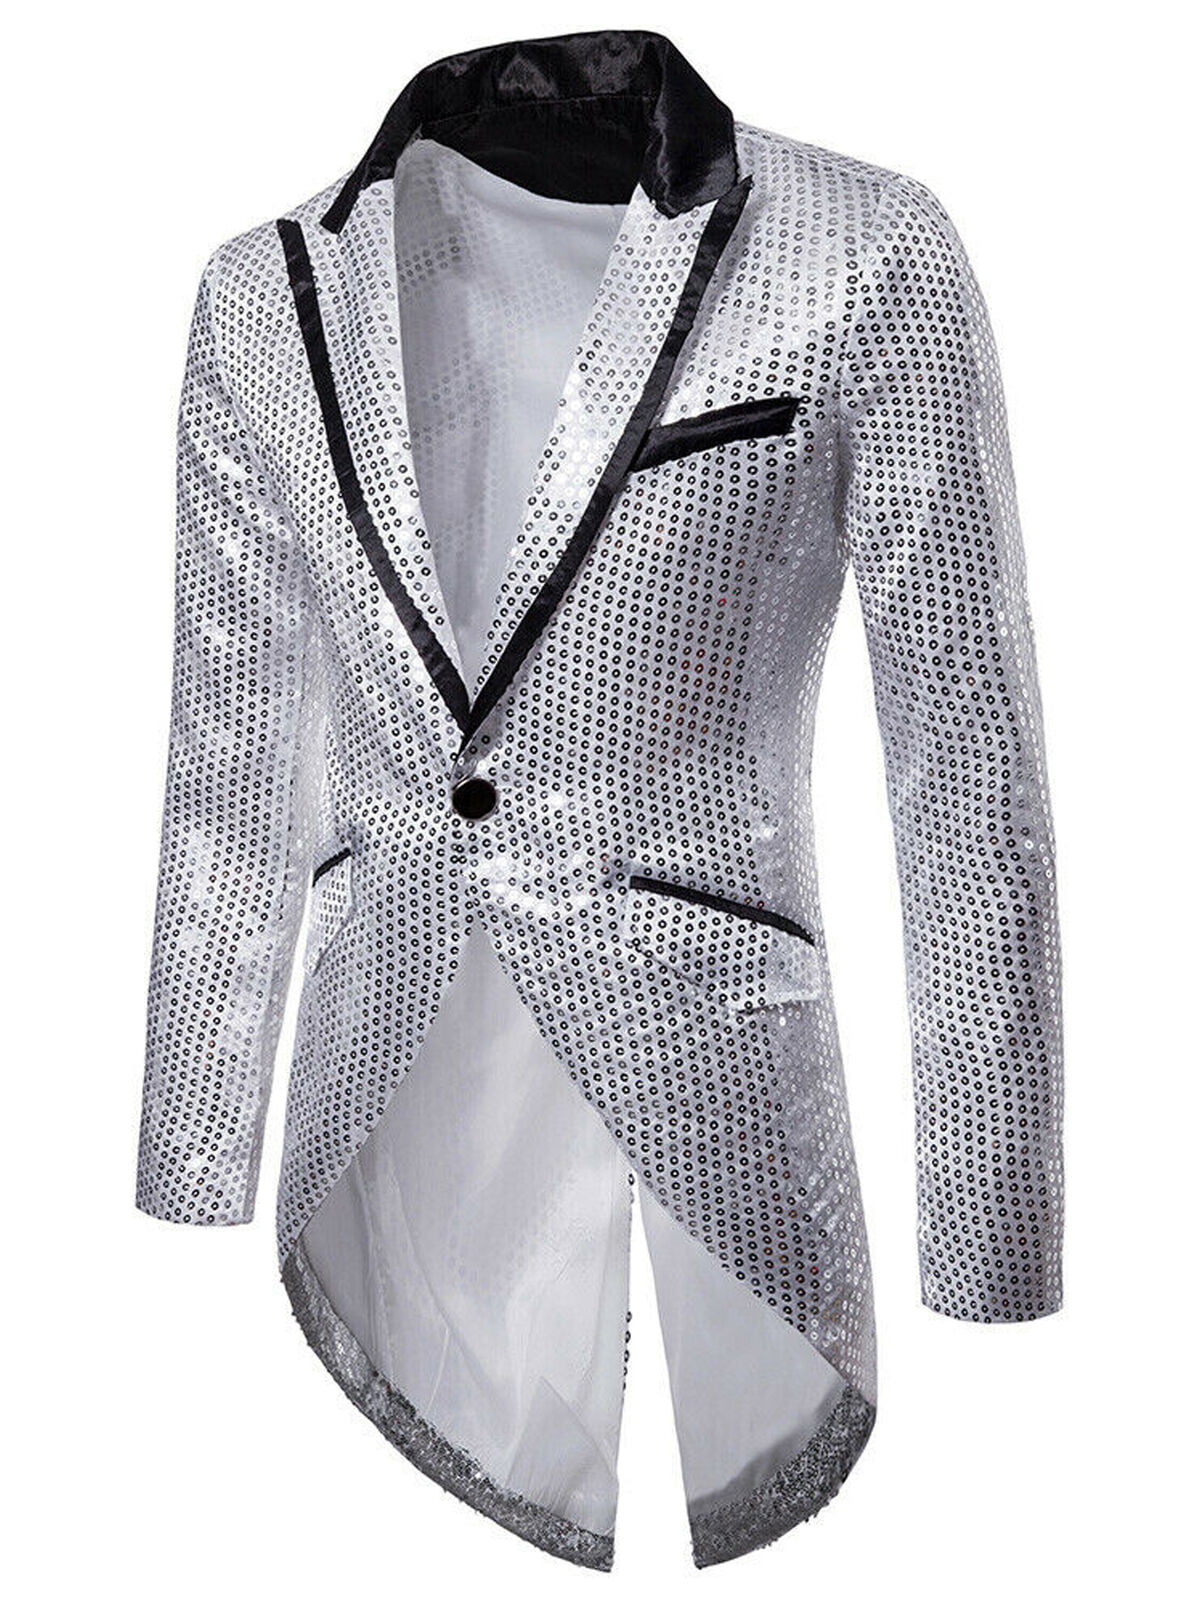 Men's Shiny Sequins Suit Jacket Fancy Cool Slim Fit Blazer One Button Tuxedo for Party,Wedding,Banquet,Prom,Holiday 